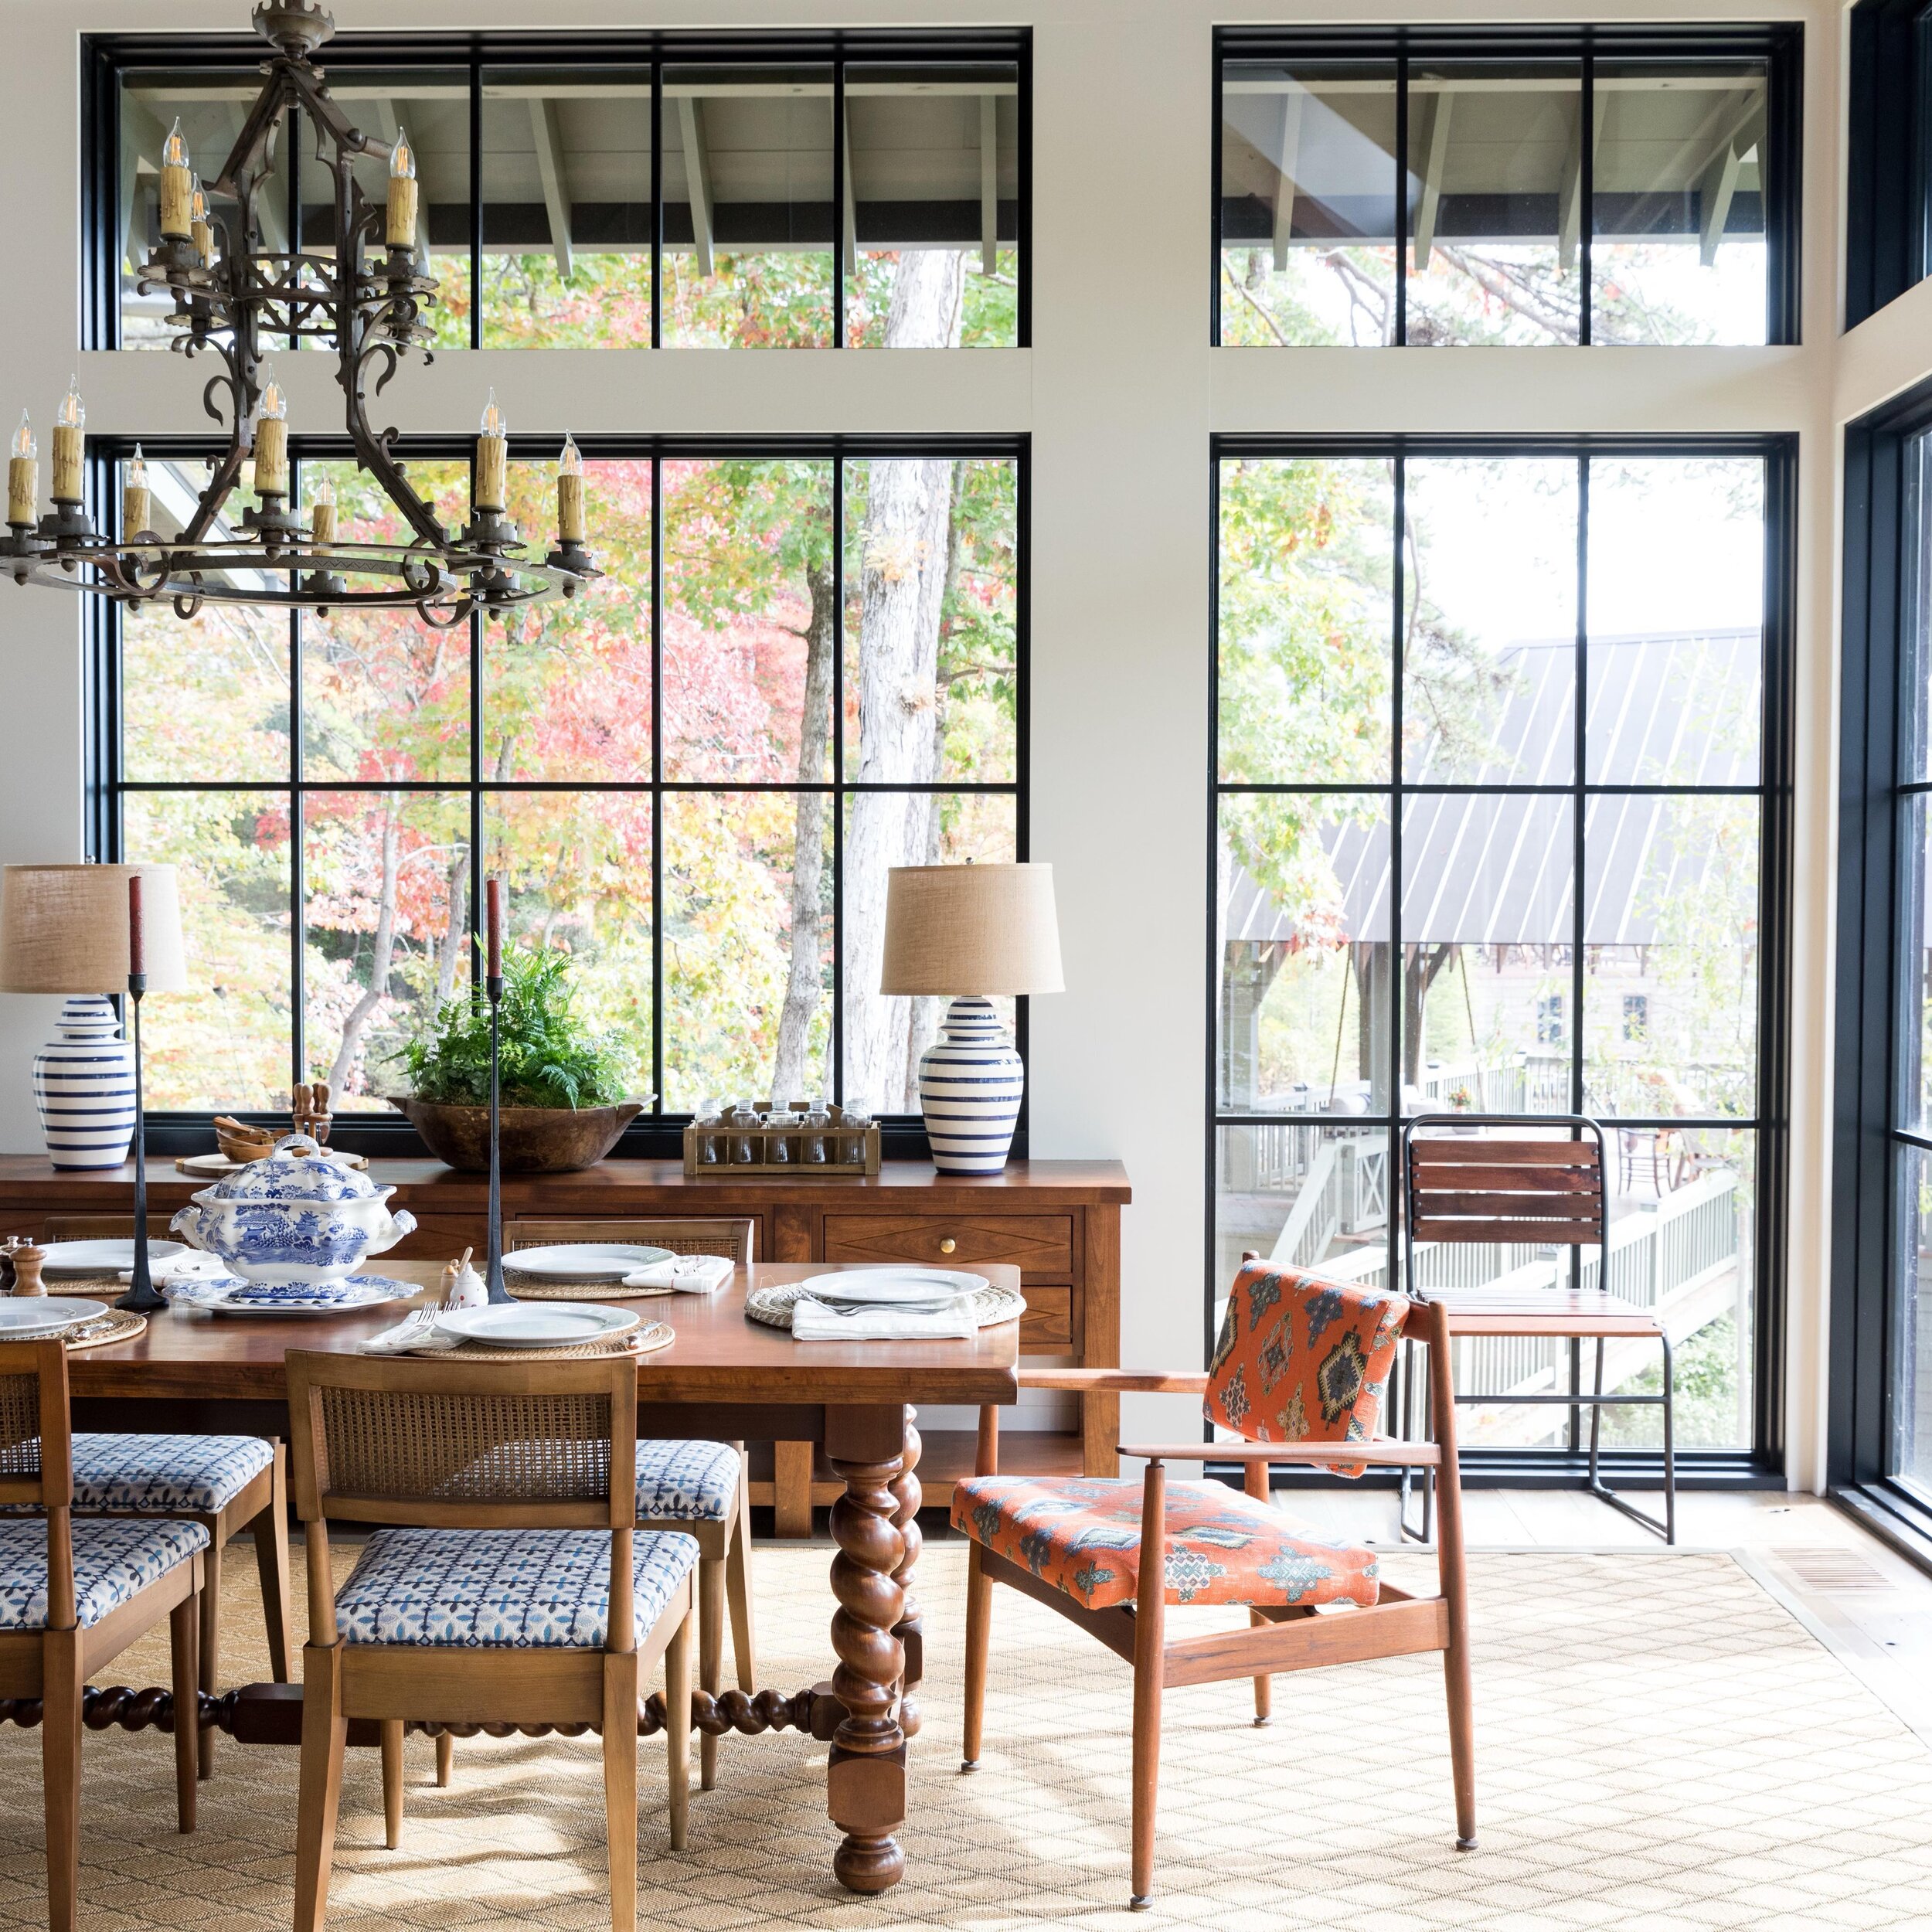 Family dinners with a beautiful view! 
&bull;
&bull;
&bull;
📸 by @lauranegrichilders 
#whitneydurhaminteriors #lakeburton #diningroom #roomwithaview #lakeview #lakehouses